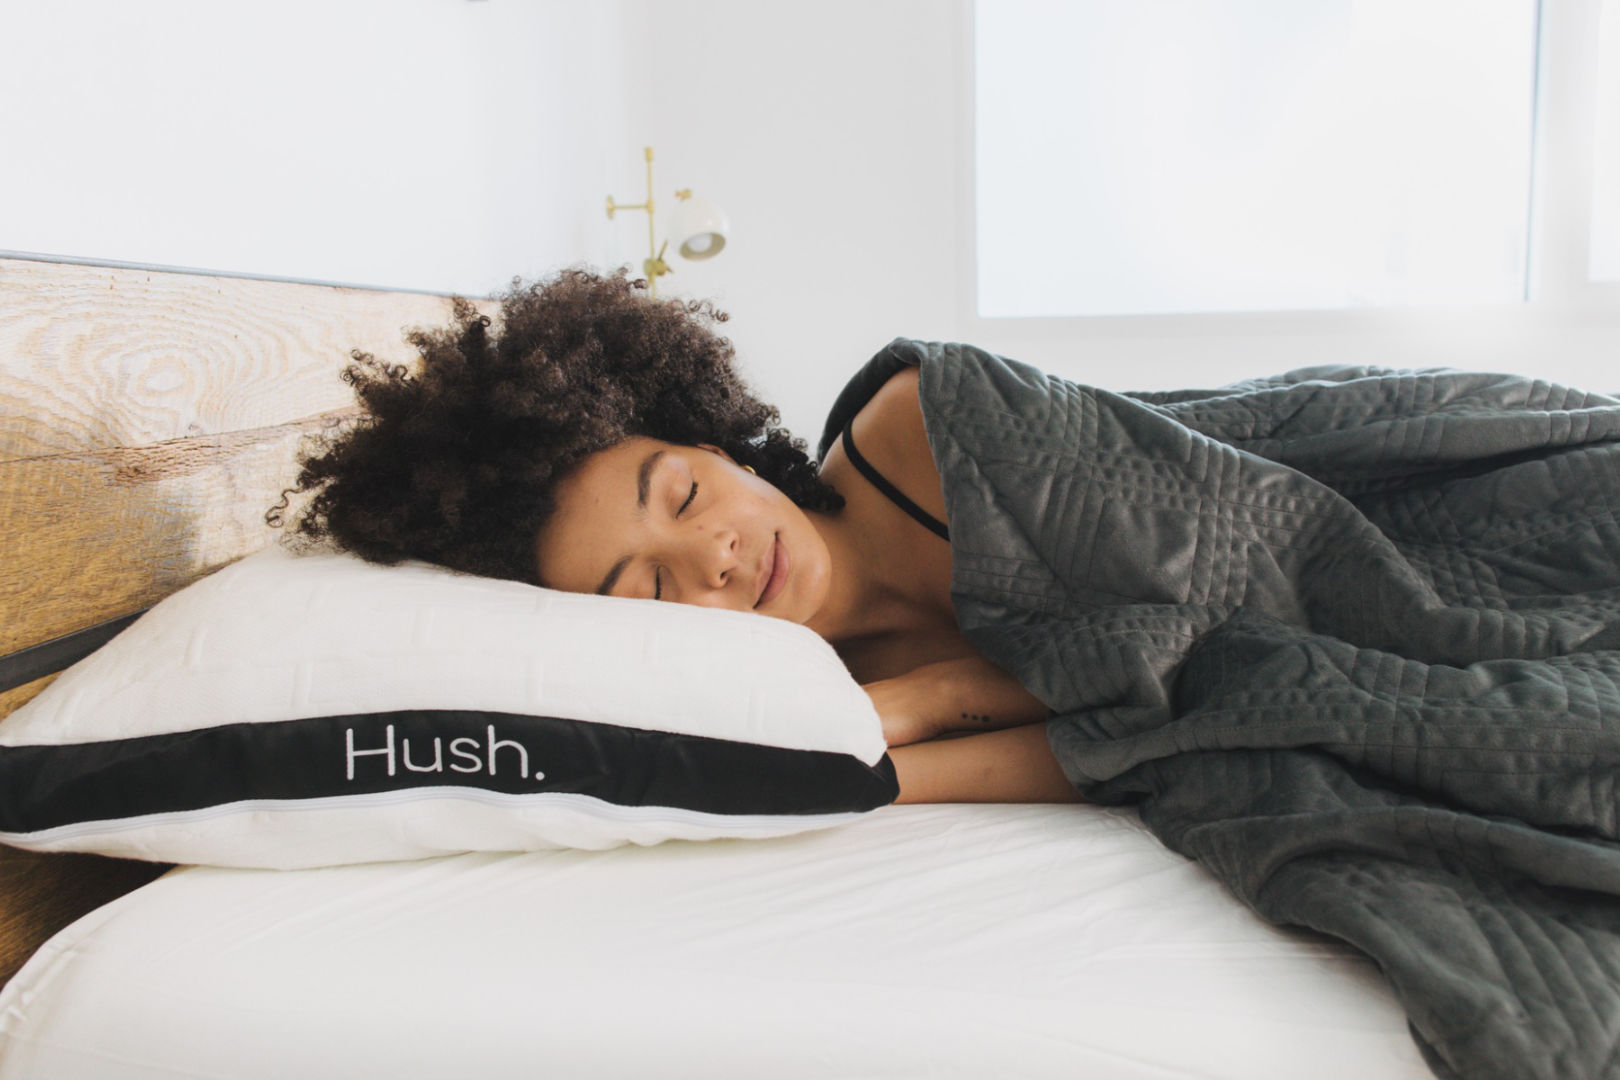 A young black woman sleeps peacefully with a Hush weighted blanket and Hush pillow.